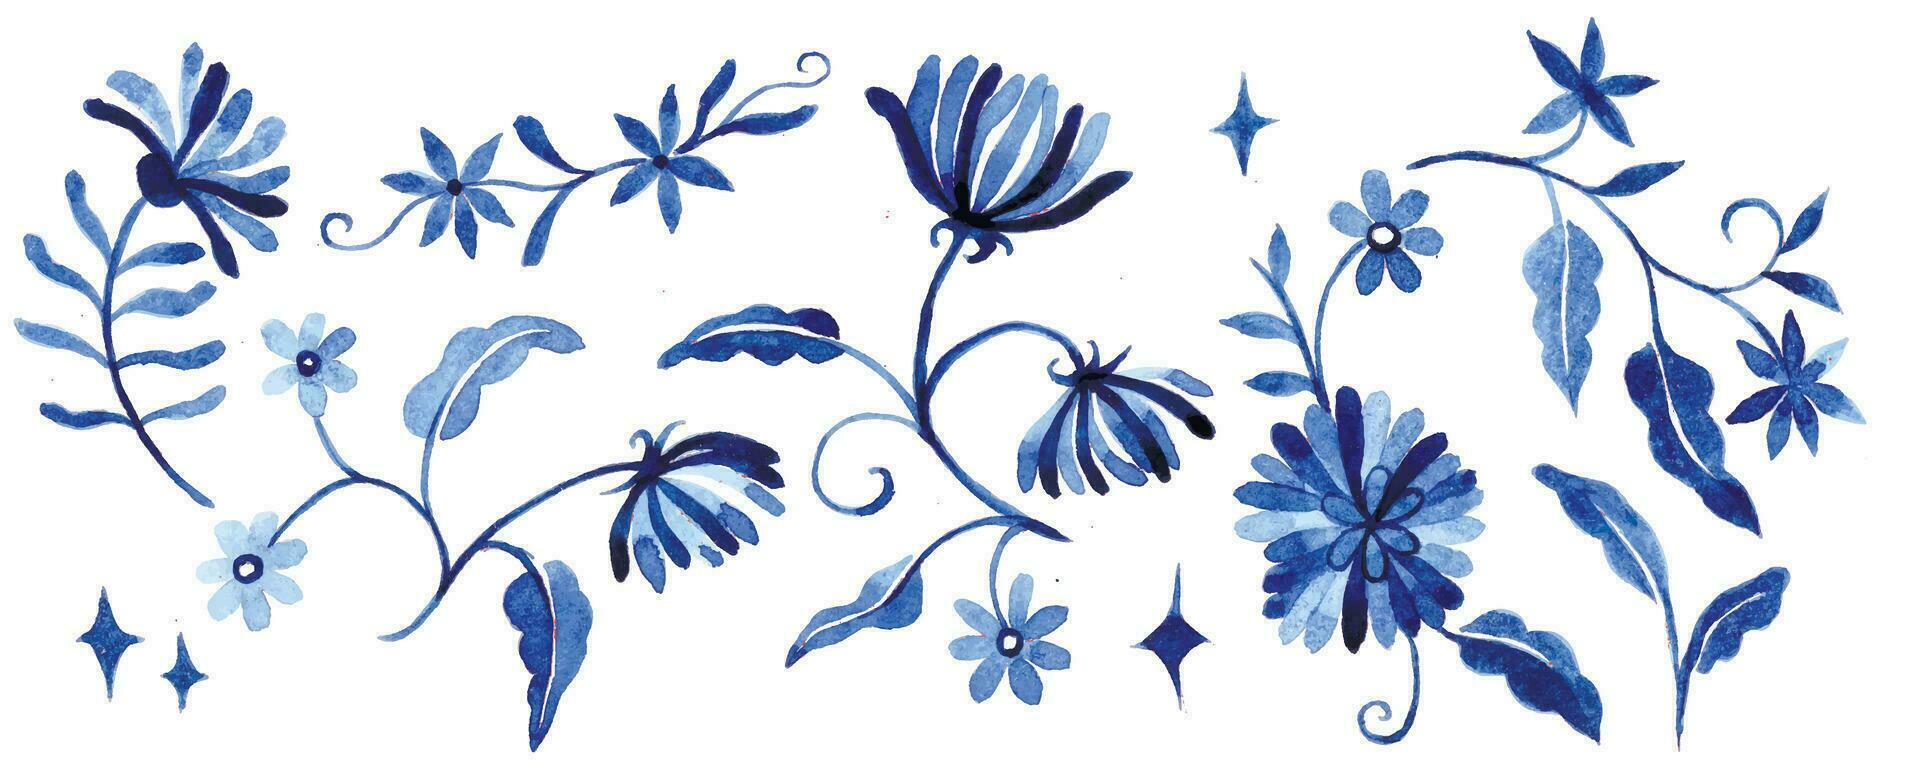 watercolor drawing, set with fantastic blue flowers on a white background, ornament vector